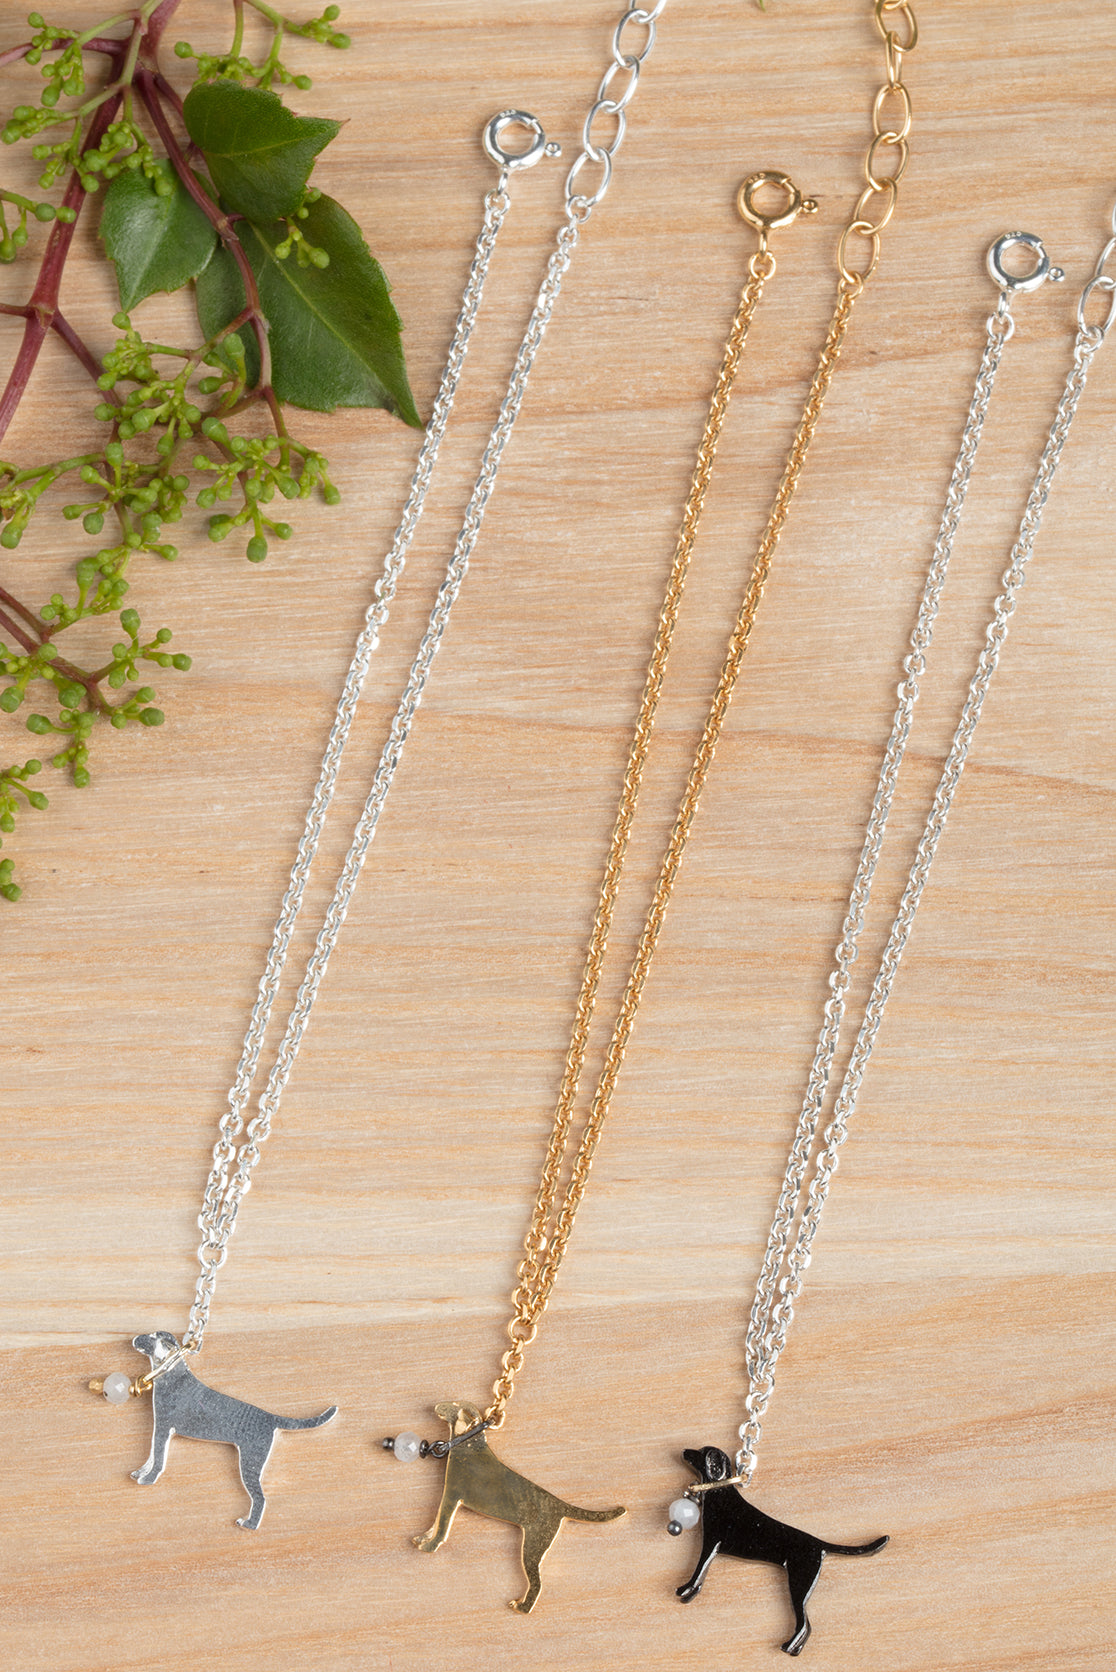 Solid silver, gold, and black necklaces with dog pendant detail